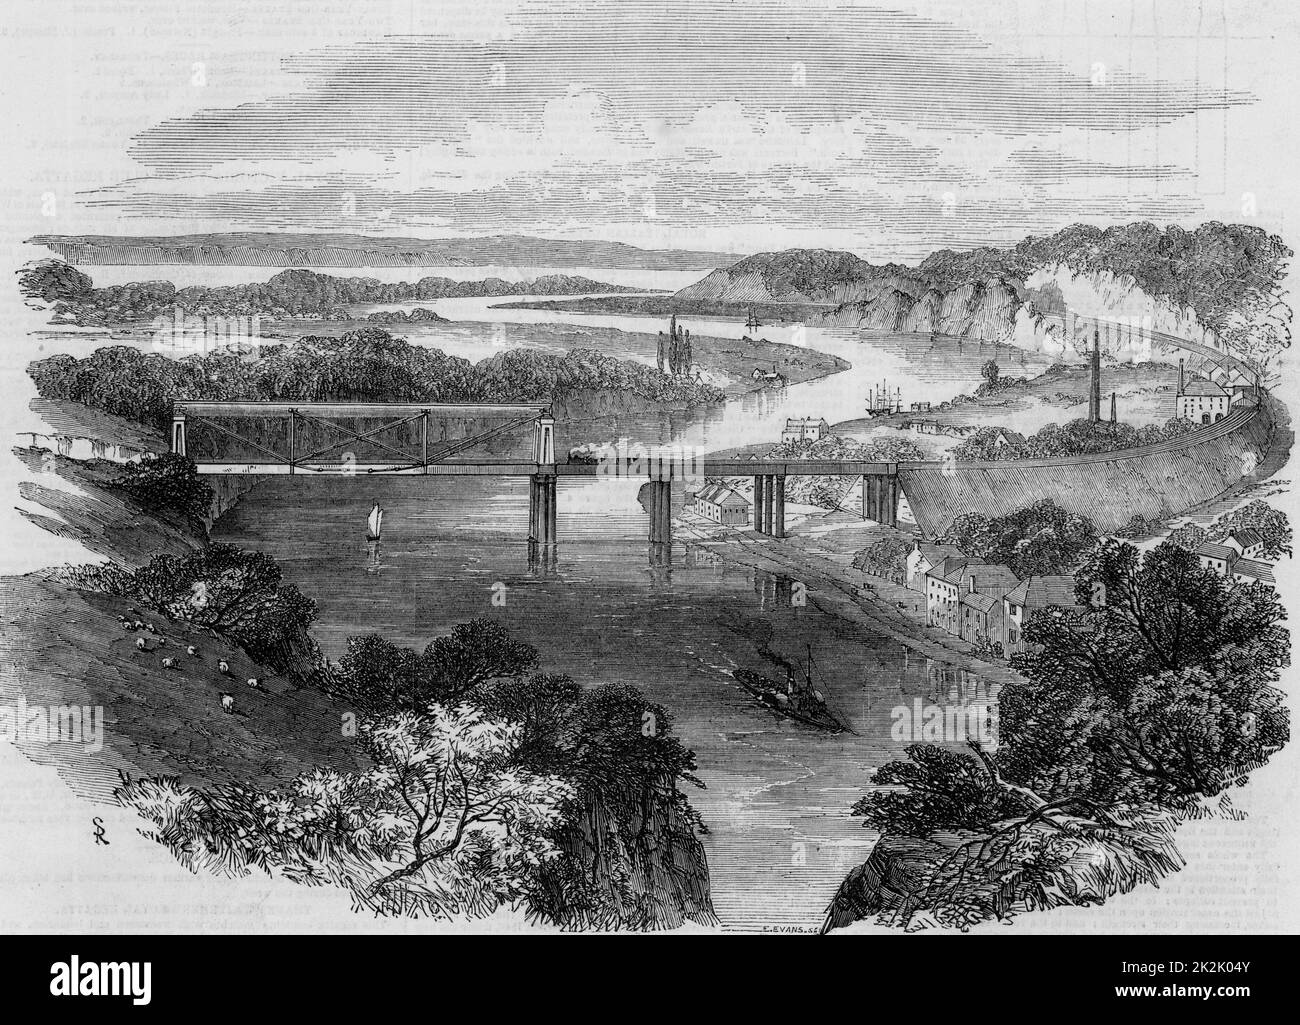 South Wales Railway: Opening of the Chepstow Bridge, 1852. Wrought iron tubular suspension bridge over the river Wye at Chepstow.  This bridge, constructed 1849-1852, was an innovative design by Sambaed Kingdom Brunel (1806-1859) and the use of wrought iron tubular girders is considered to be a dummy run for his last great masterpiece, the Royal Albert bridge over the Tamar at Saltash.   The Chepstow bridge carried the South Wales Railway over the Wye just above its junction with the Severn. Brunel was engineer to the railway.   From 'The Illustrated London News'. (London, 24 July 1852). Stock Photo